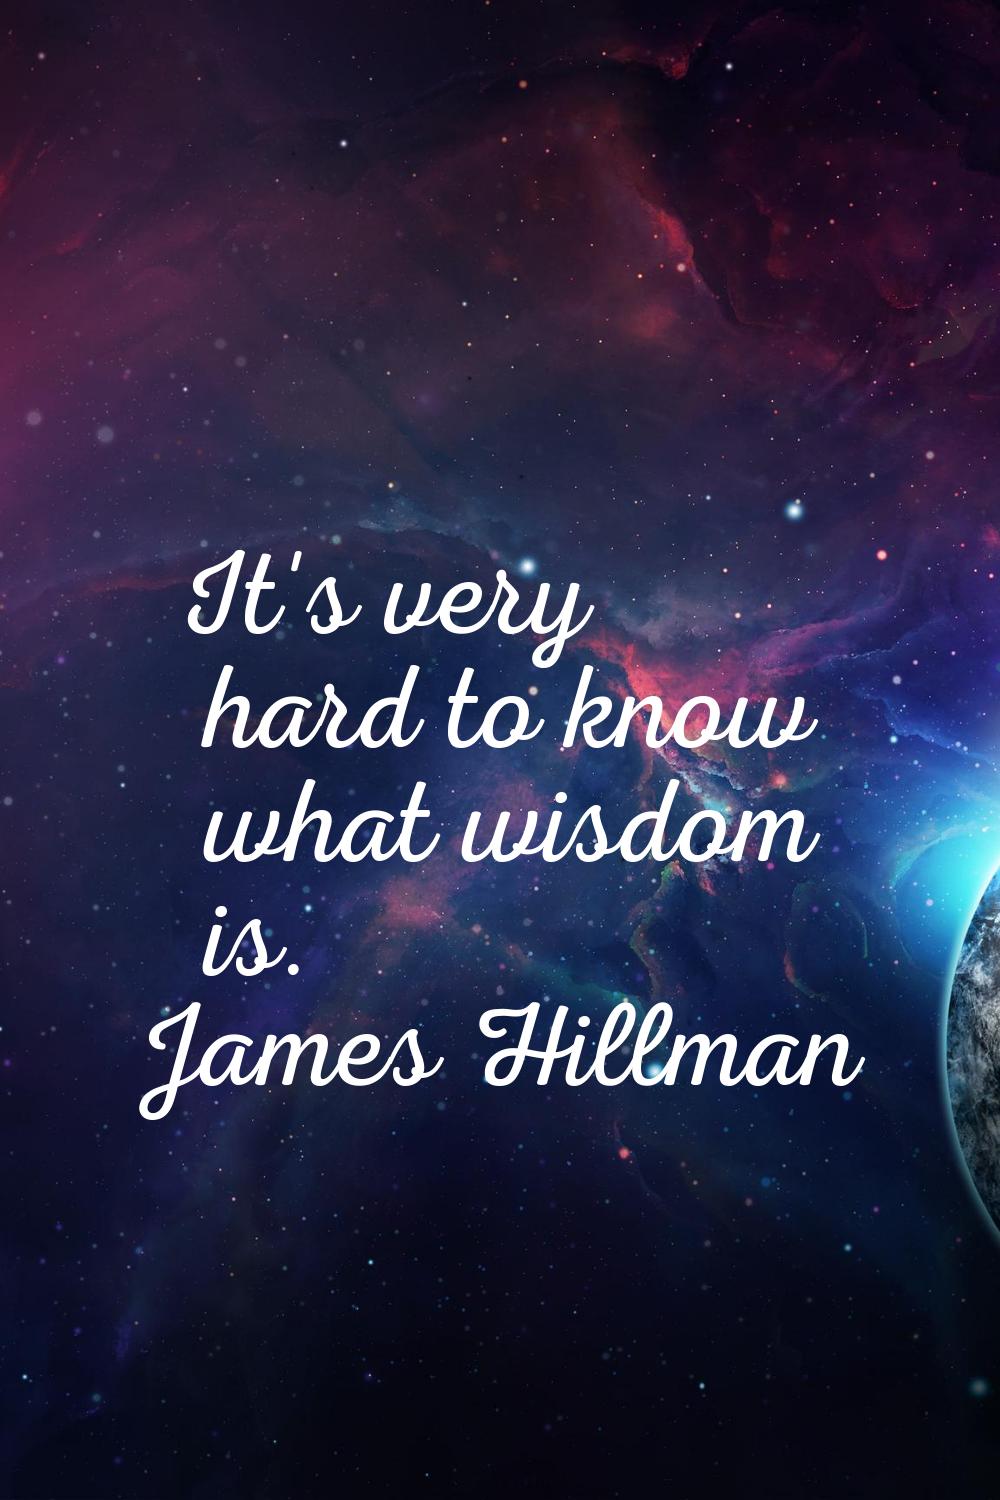 It's very hard to know what wisdom is.